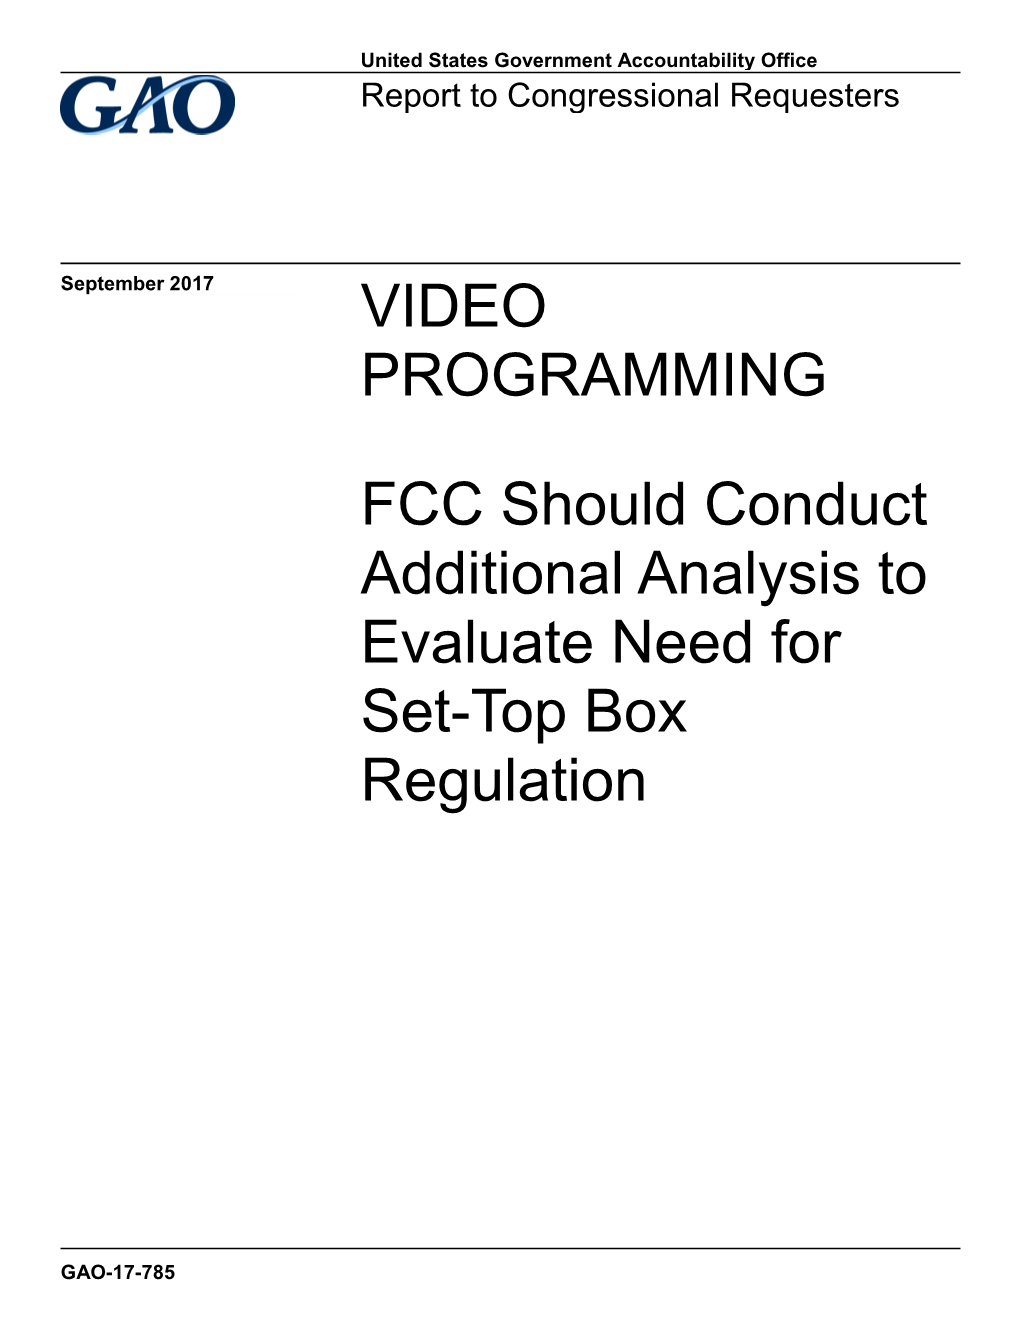 FCC Should Conduct Additional Analysis to Evaluate Need for Set-Top Box Regulation